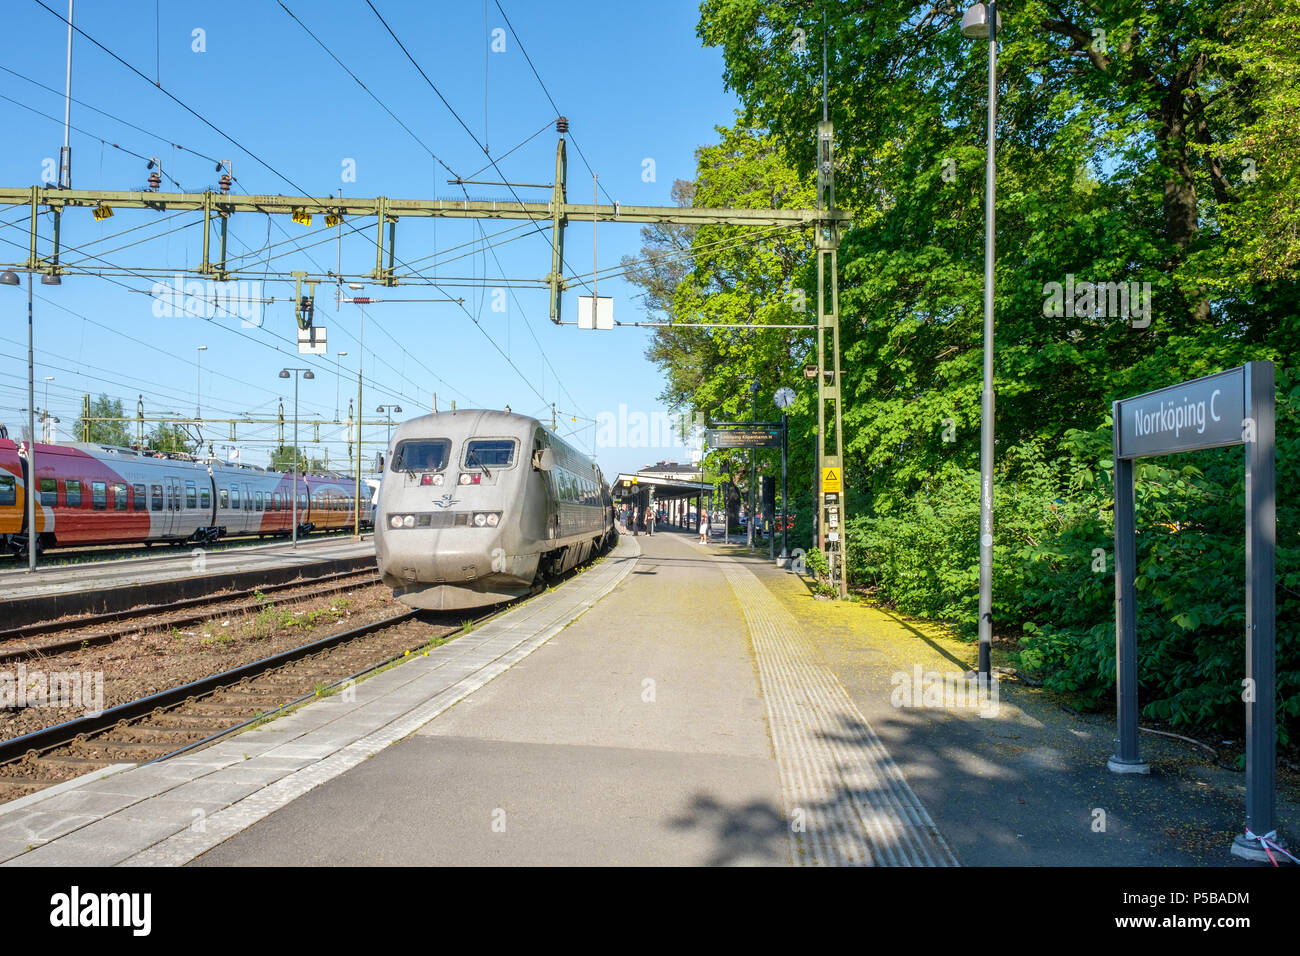 High-speed inter-city train between Stockholm and Copenhagen stopping at Norrkoping Central Station. Stock Photo